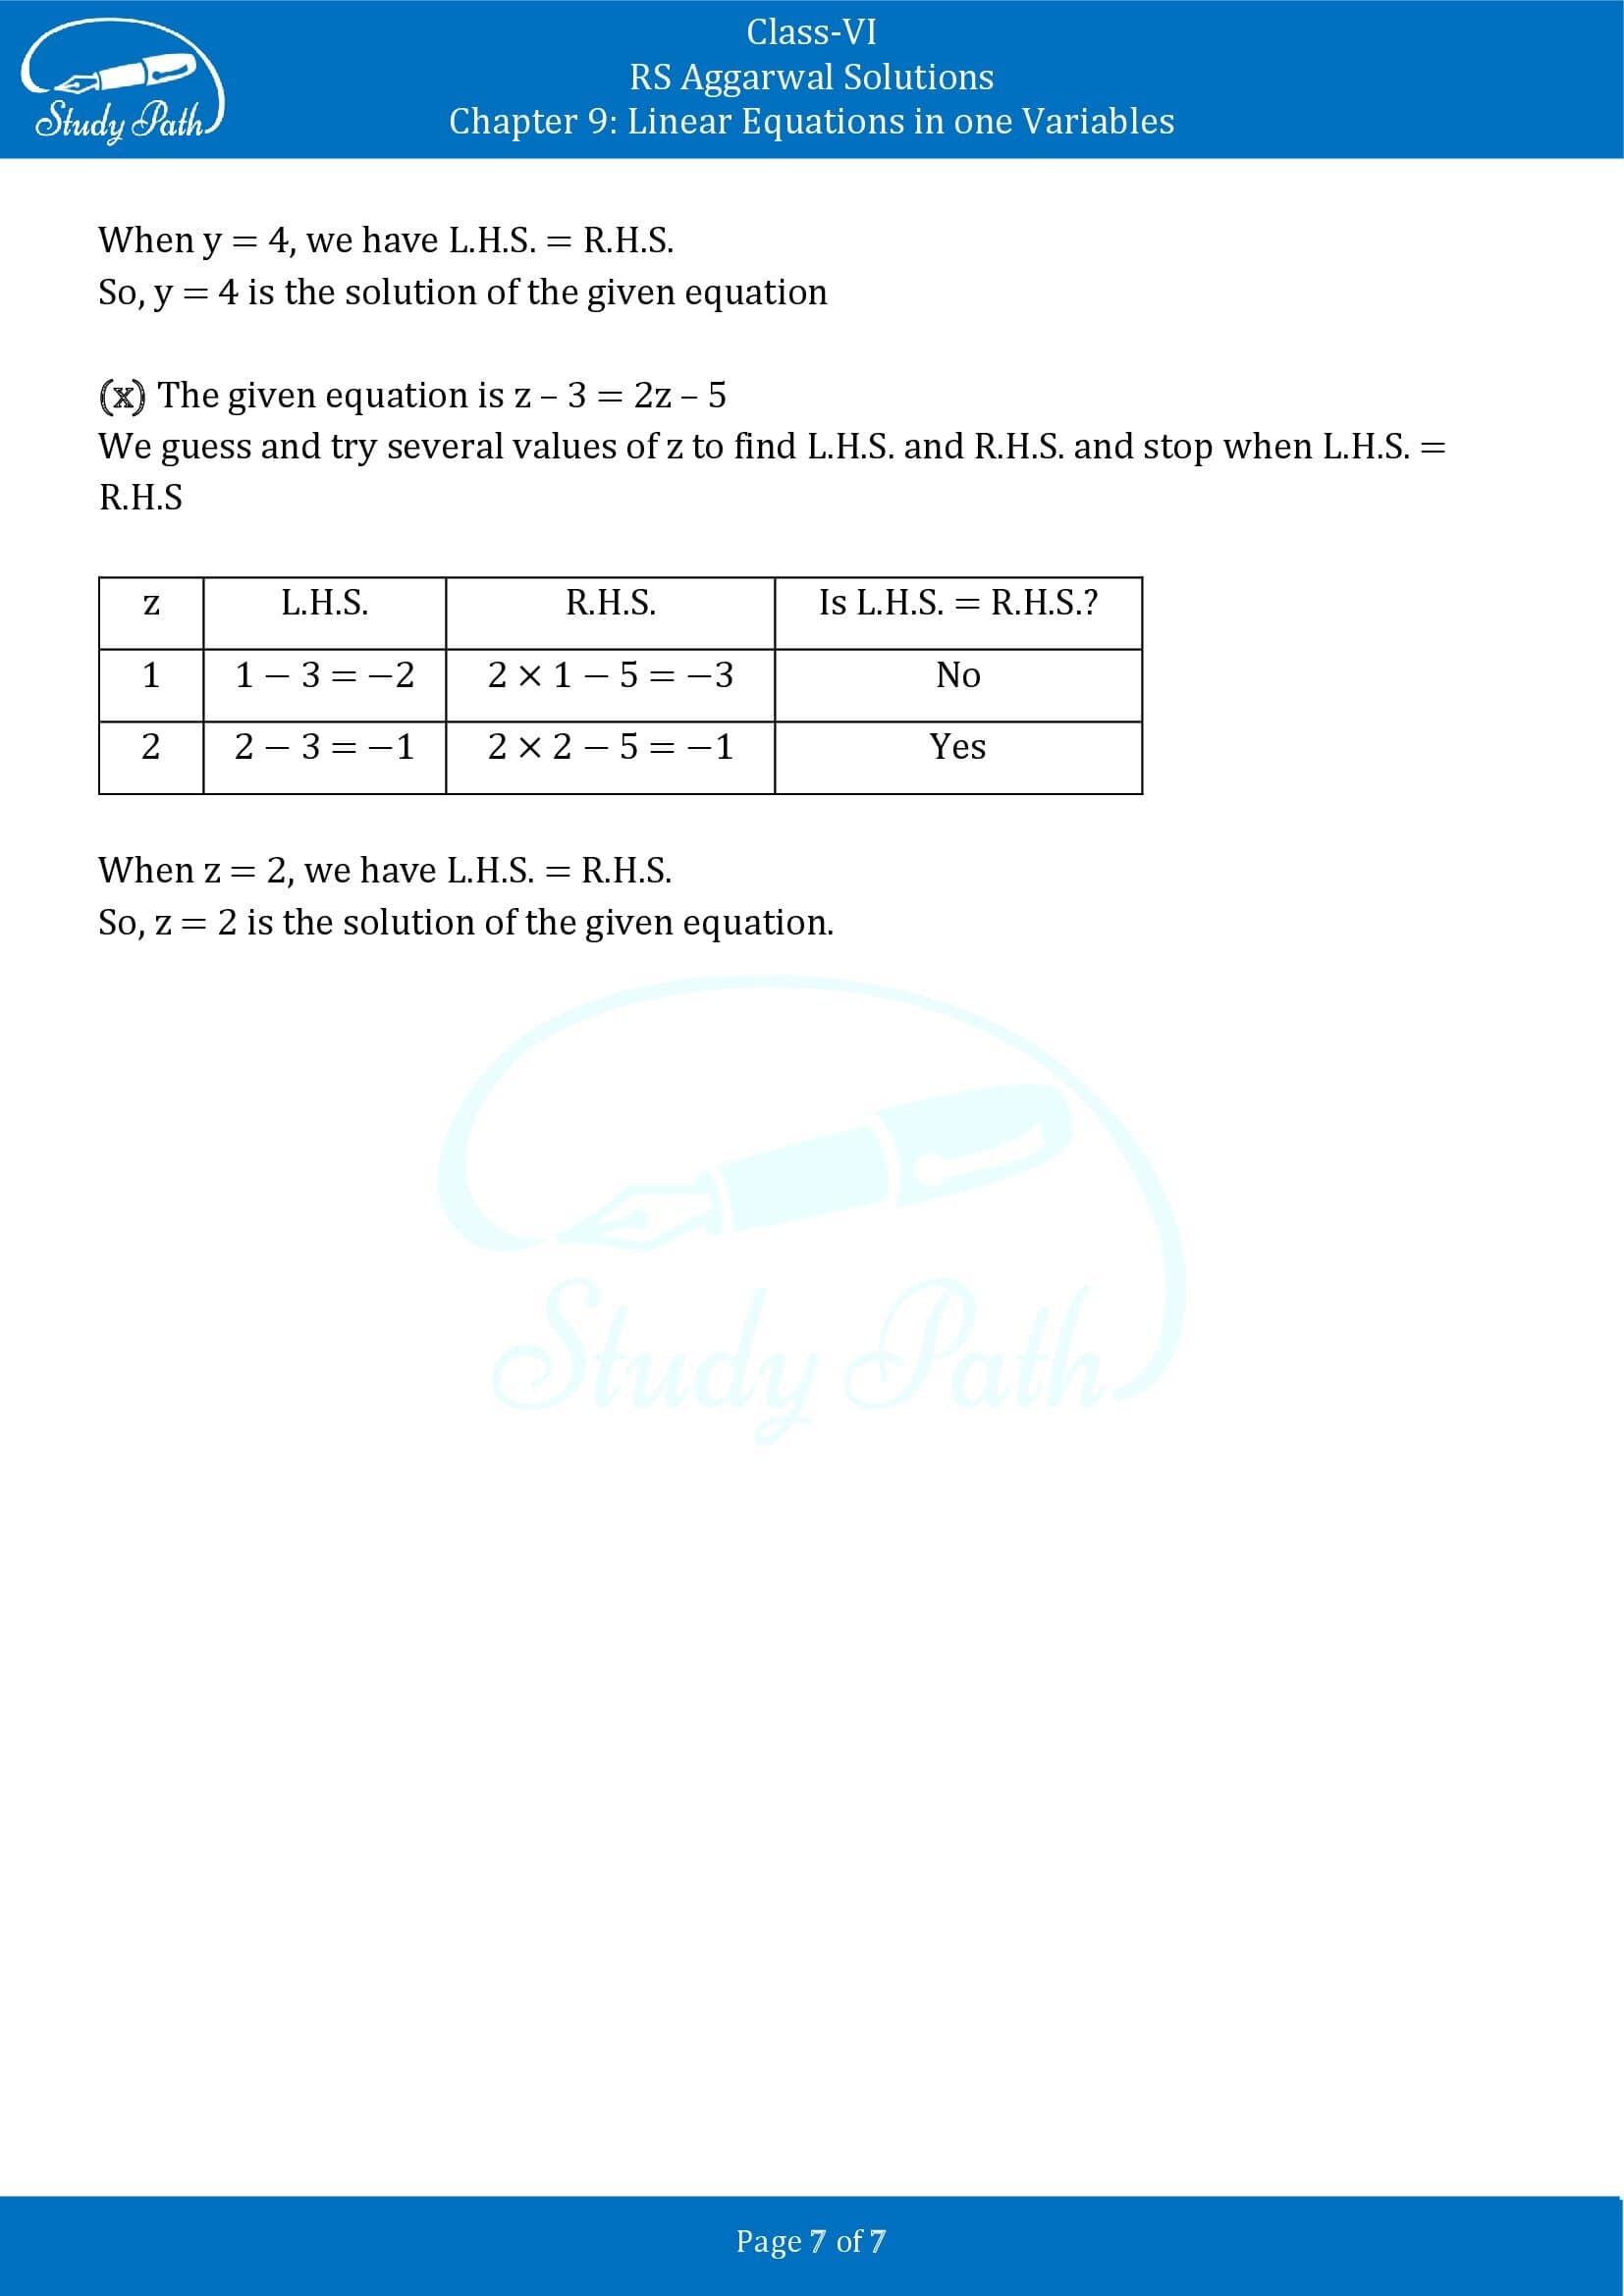 RS Aggarwal Solutions Class 6 Chapter 9 Linear Equations in One Variable Exercise 9A 00007